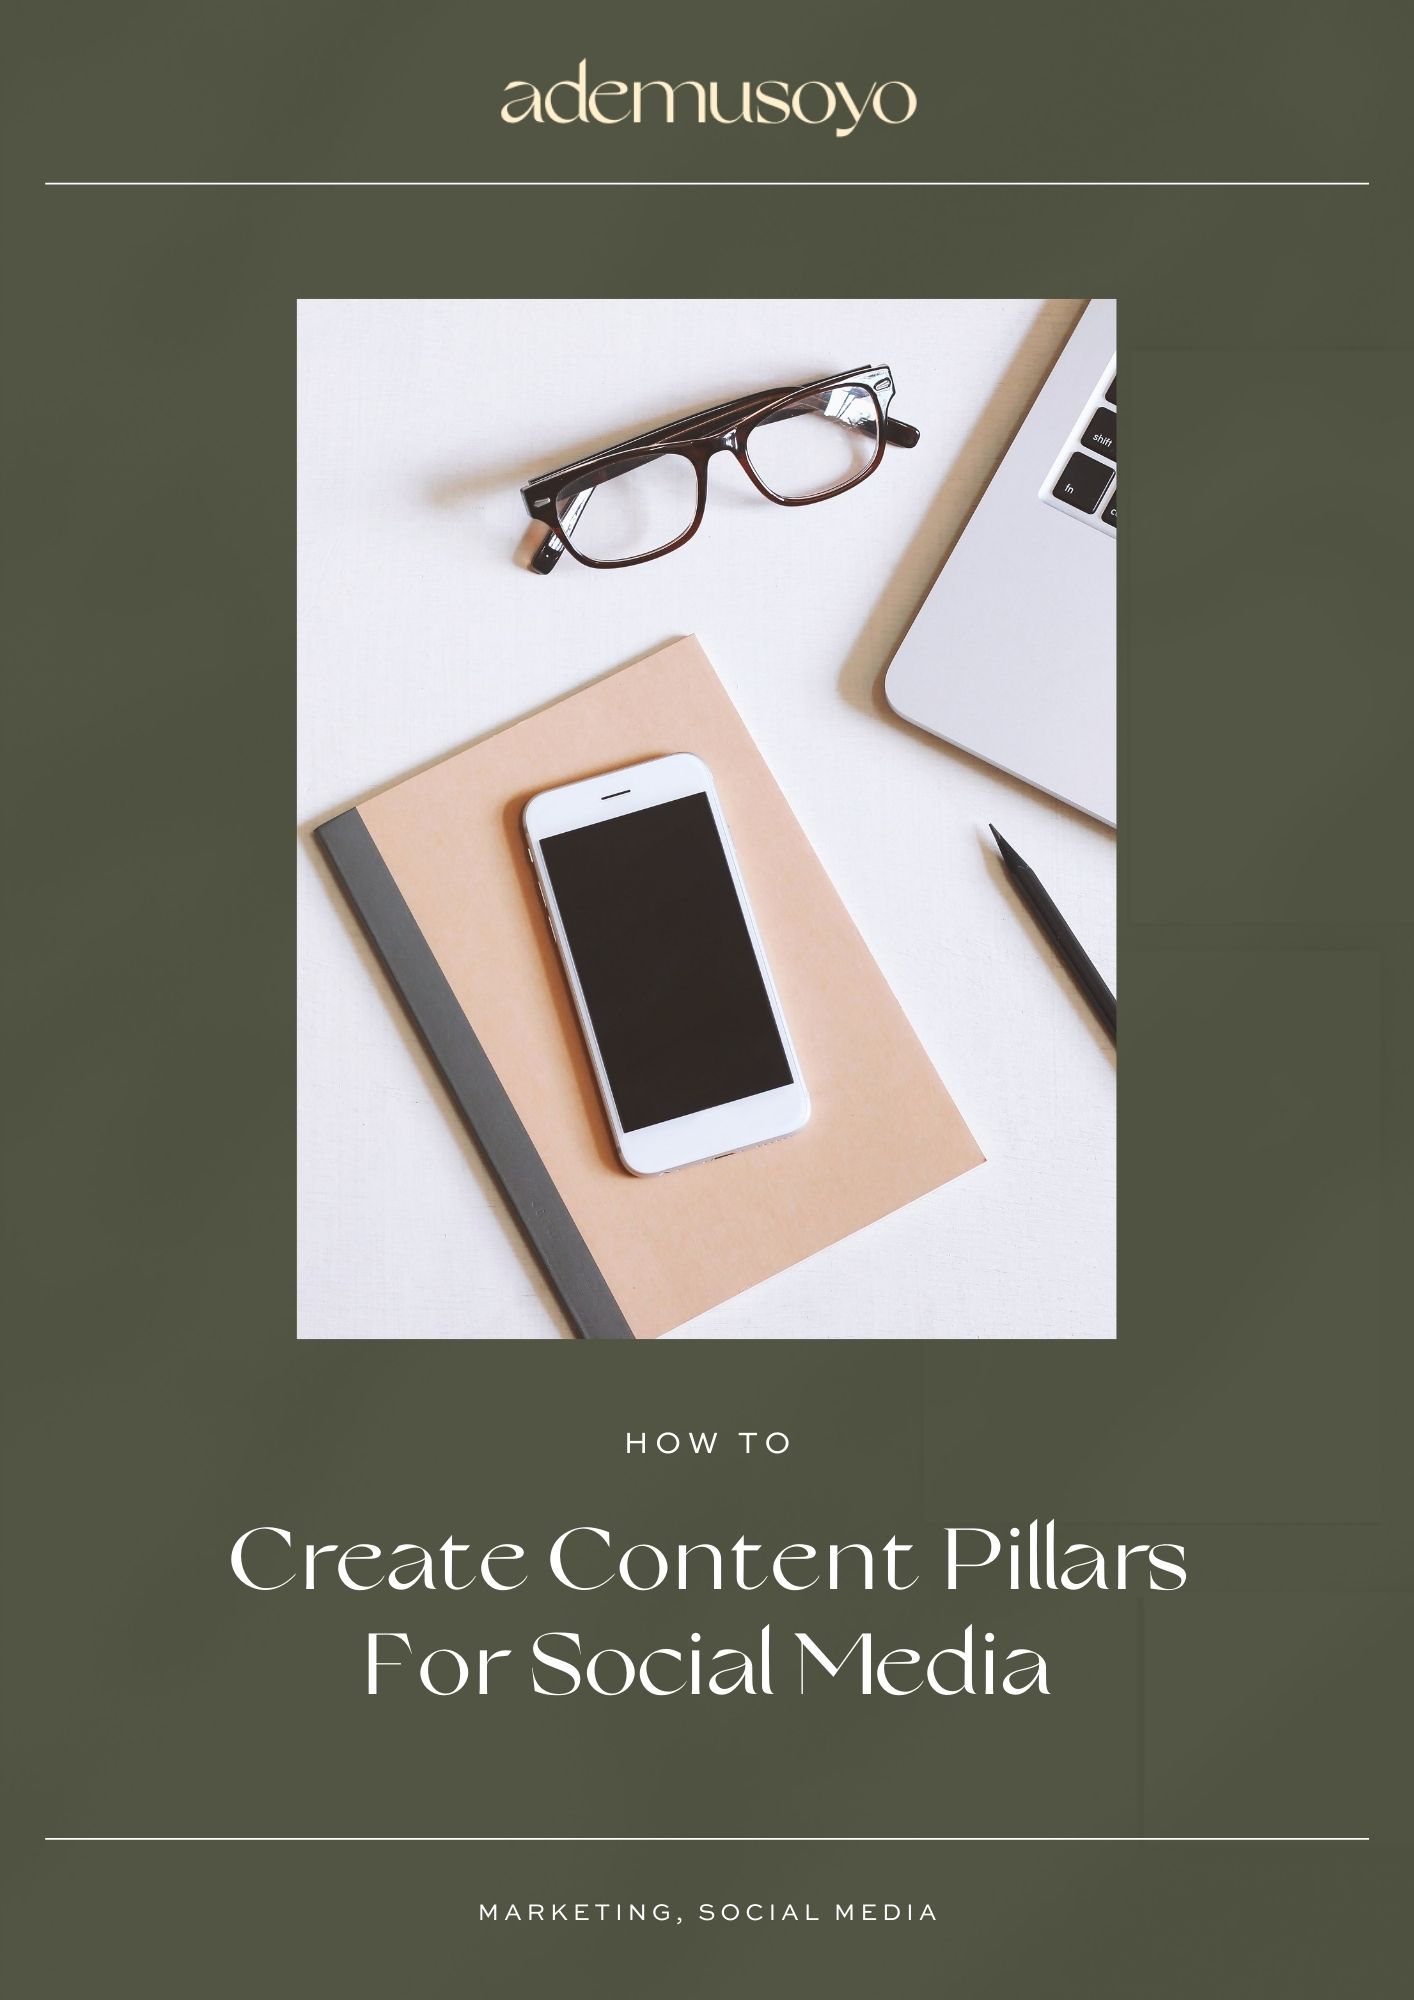 How To Create Content Pillars for Social Media